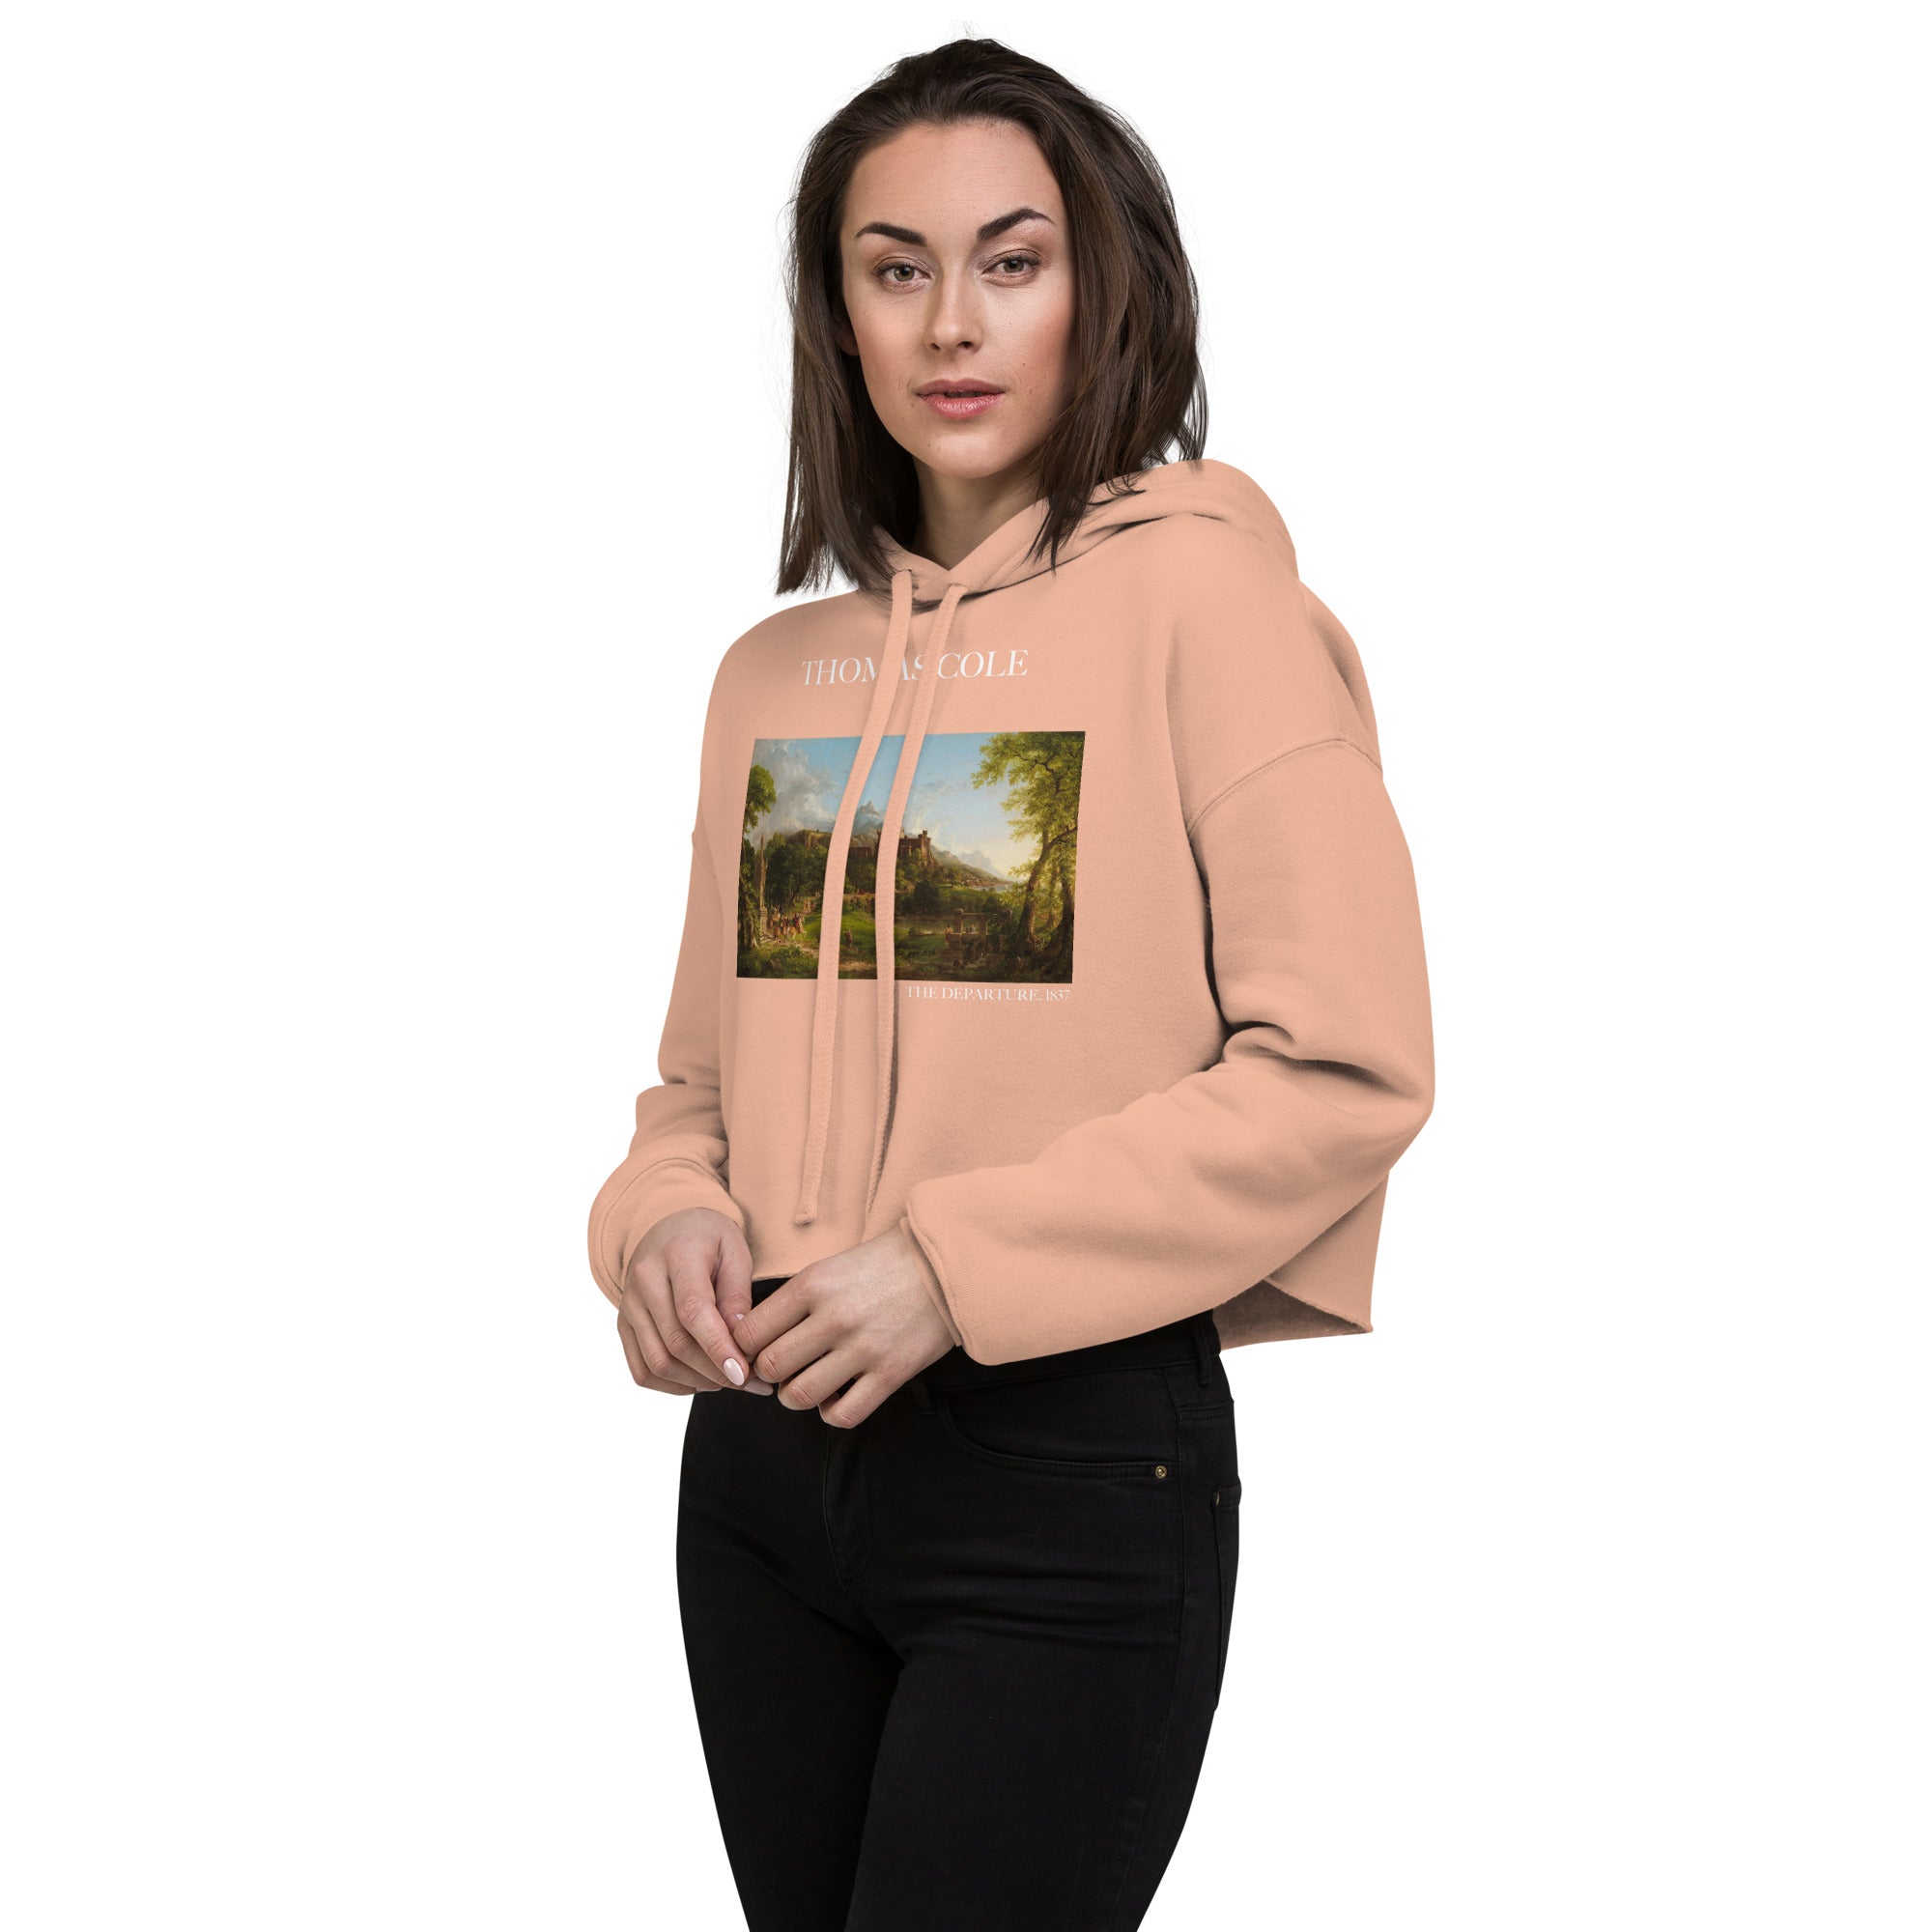 Thomas Cole 'The Departure' Famous Painting Cropped Hoodie | Premium Art Cropped Hoodie